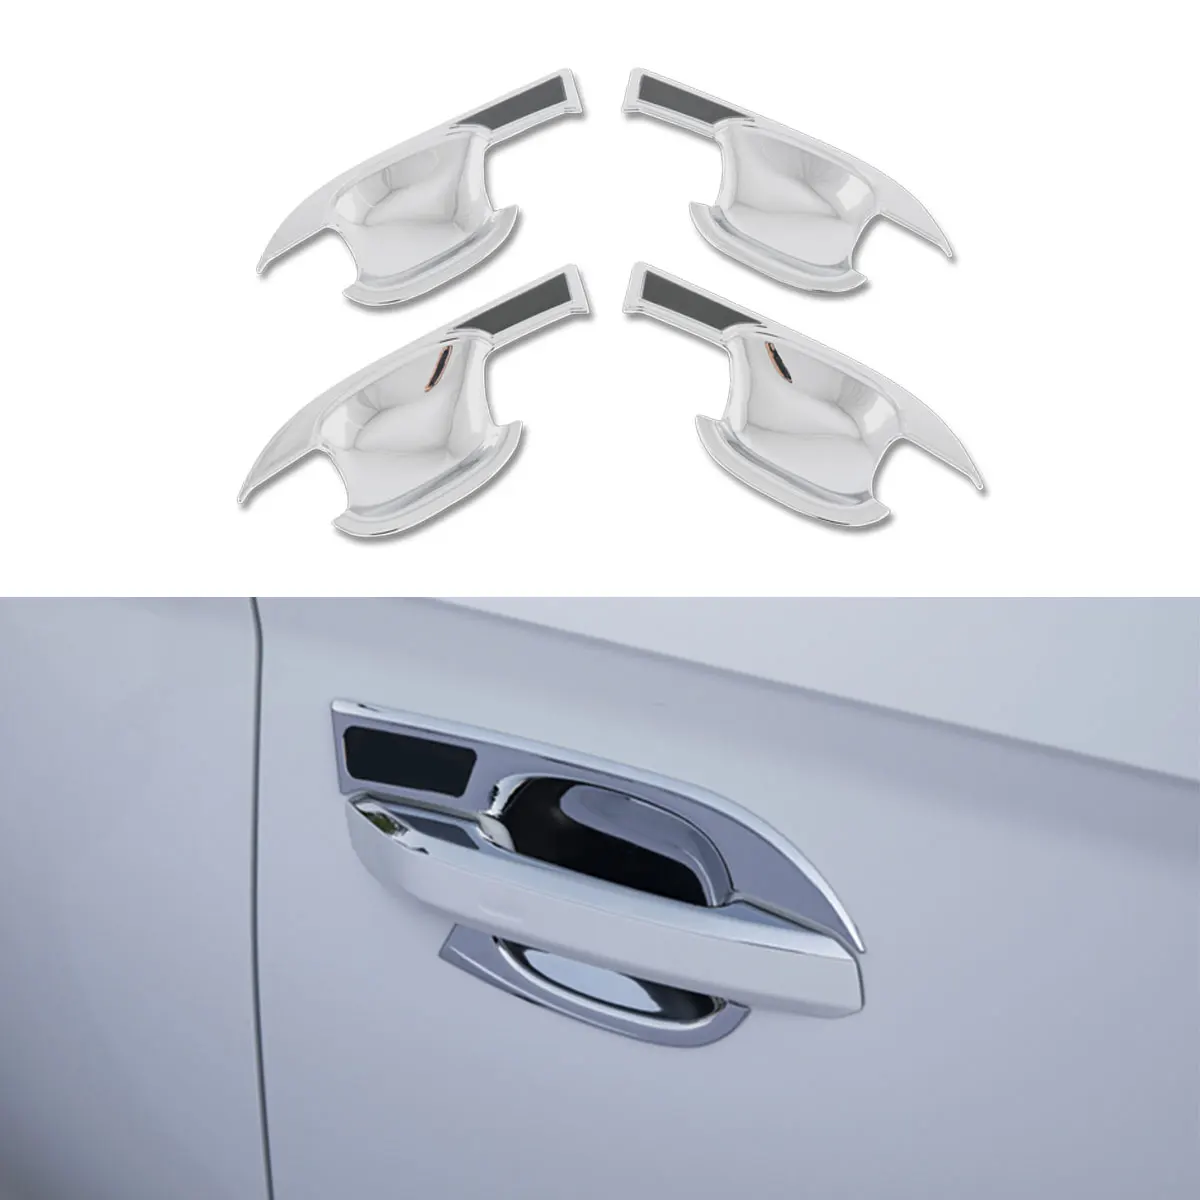 

4X Chrome ABS Side Door Handle Bowl Cover Protector Trim For Audi A4 B9 A5 A4L 2017 2018 2019 2020